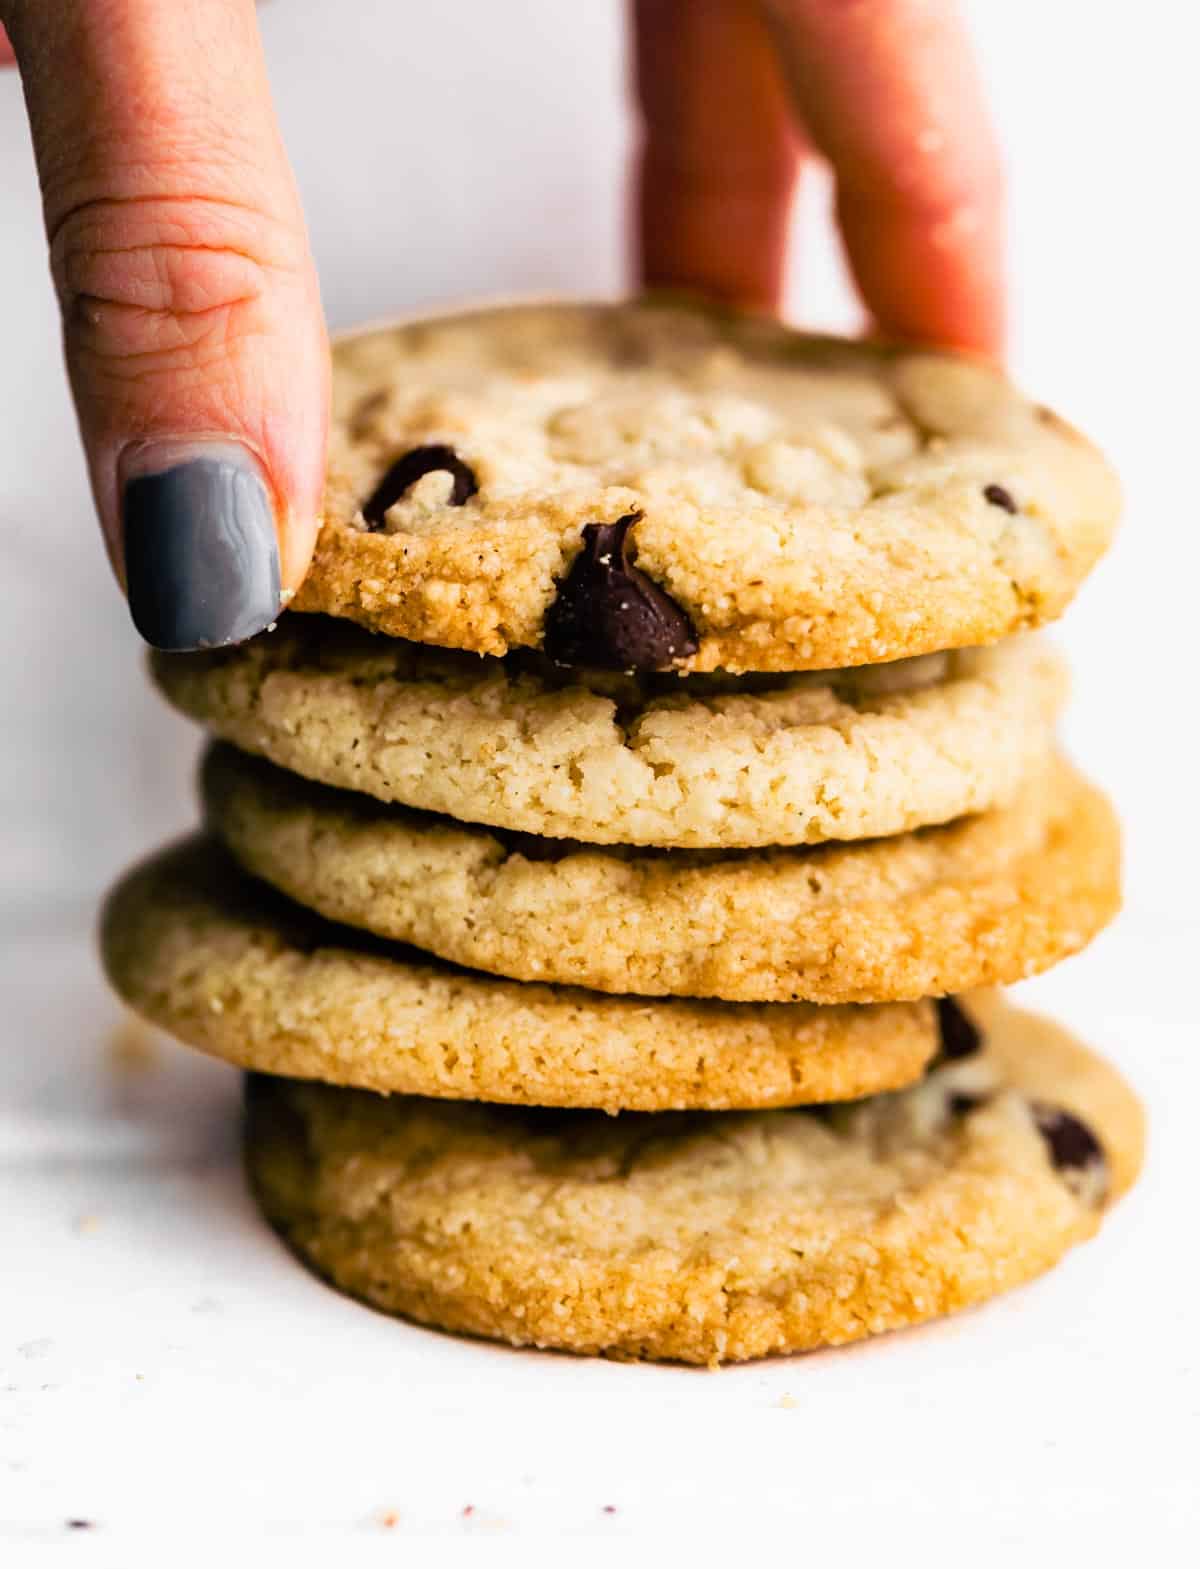 Hand picking up a Chocolate Chip Cookie.